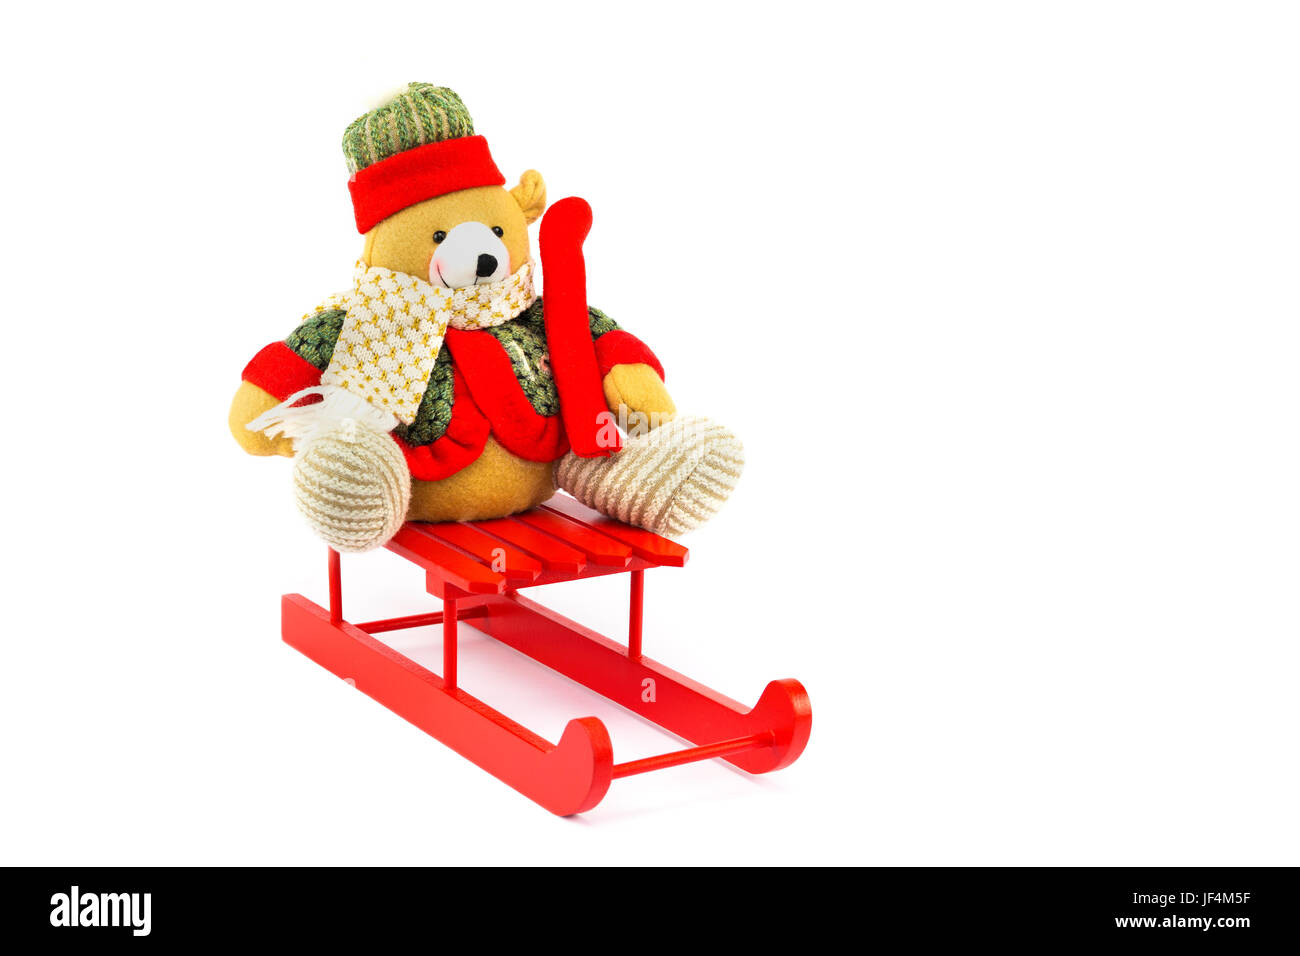 Dressed Christmas bear on red wooden sleigh Stock Photo